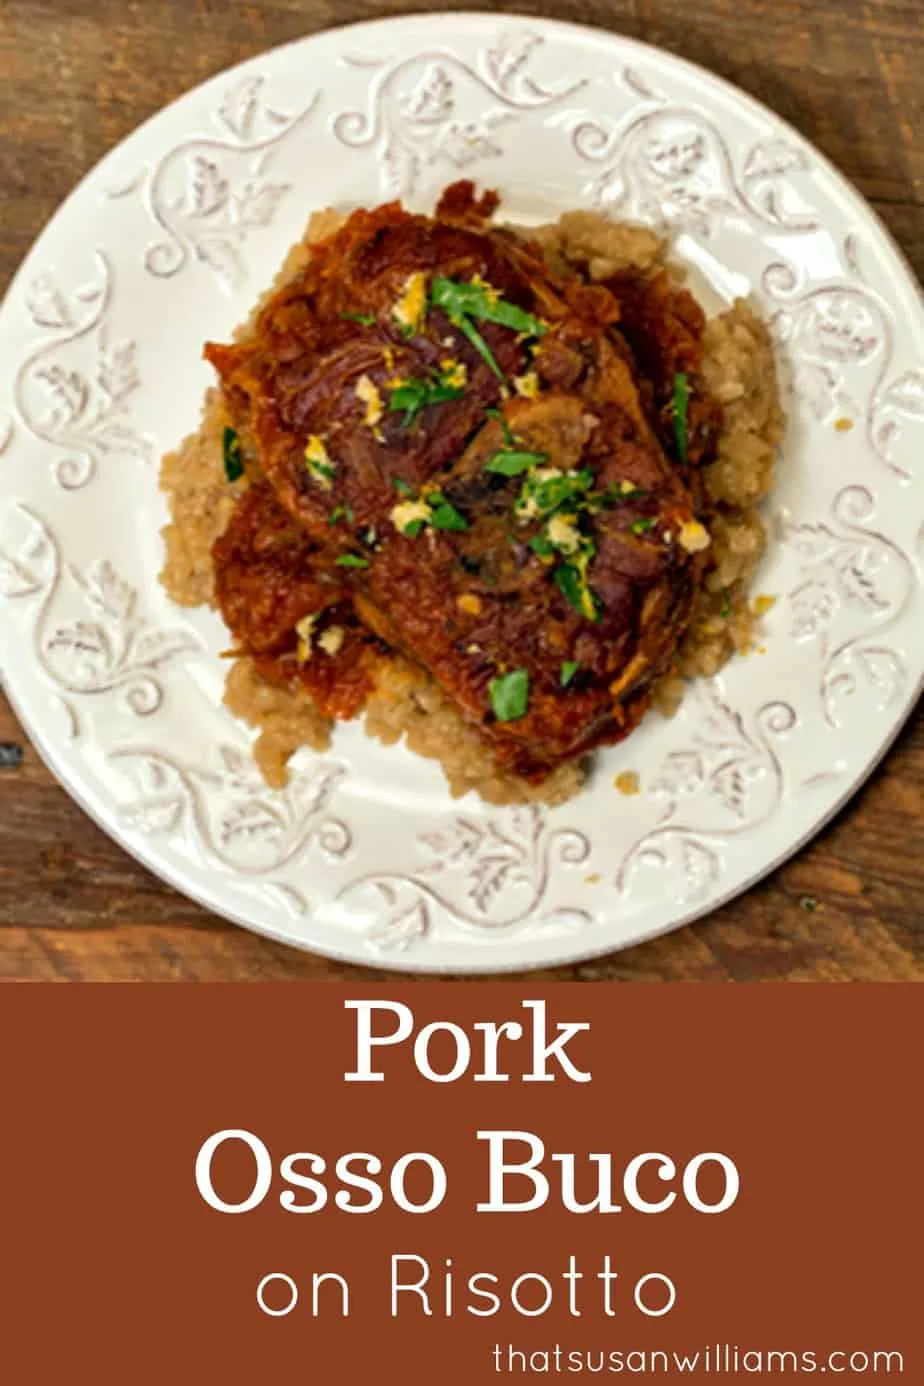 Pork Osso Buco is elegant comfort food. Braised pork shank bones, simmered in a delicious sauce, topped with a fresh gremolata, and served on risotto. #comfortfood #recipe #pork #braise